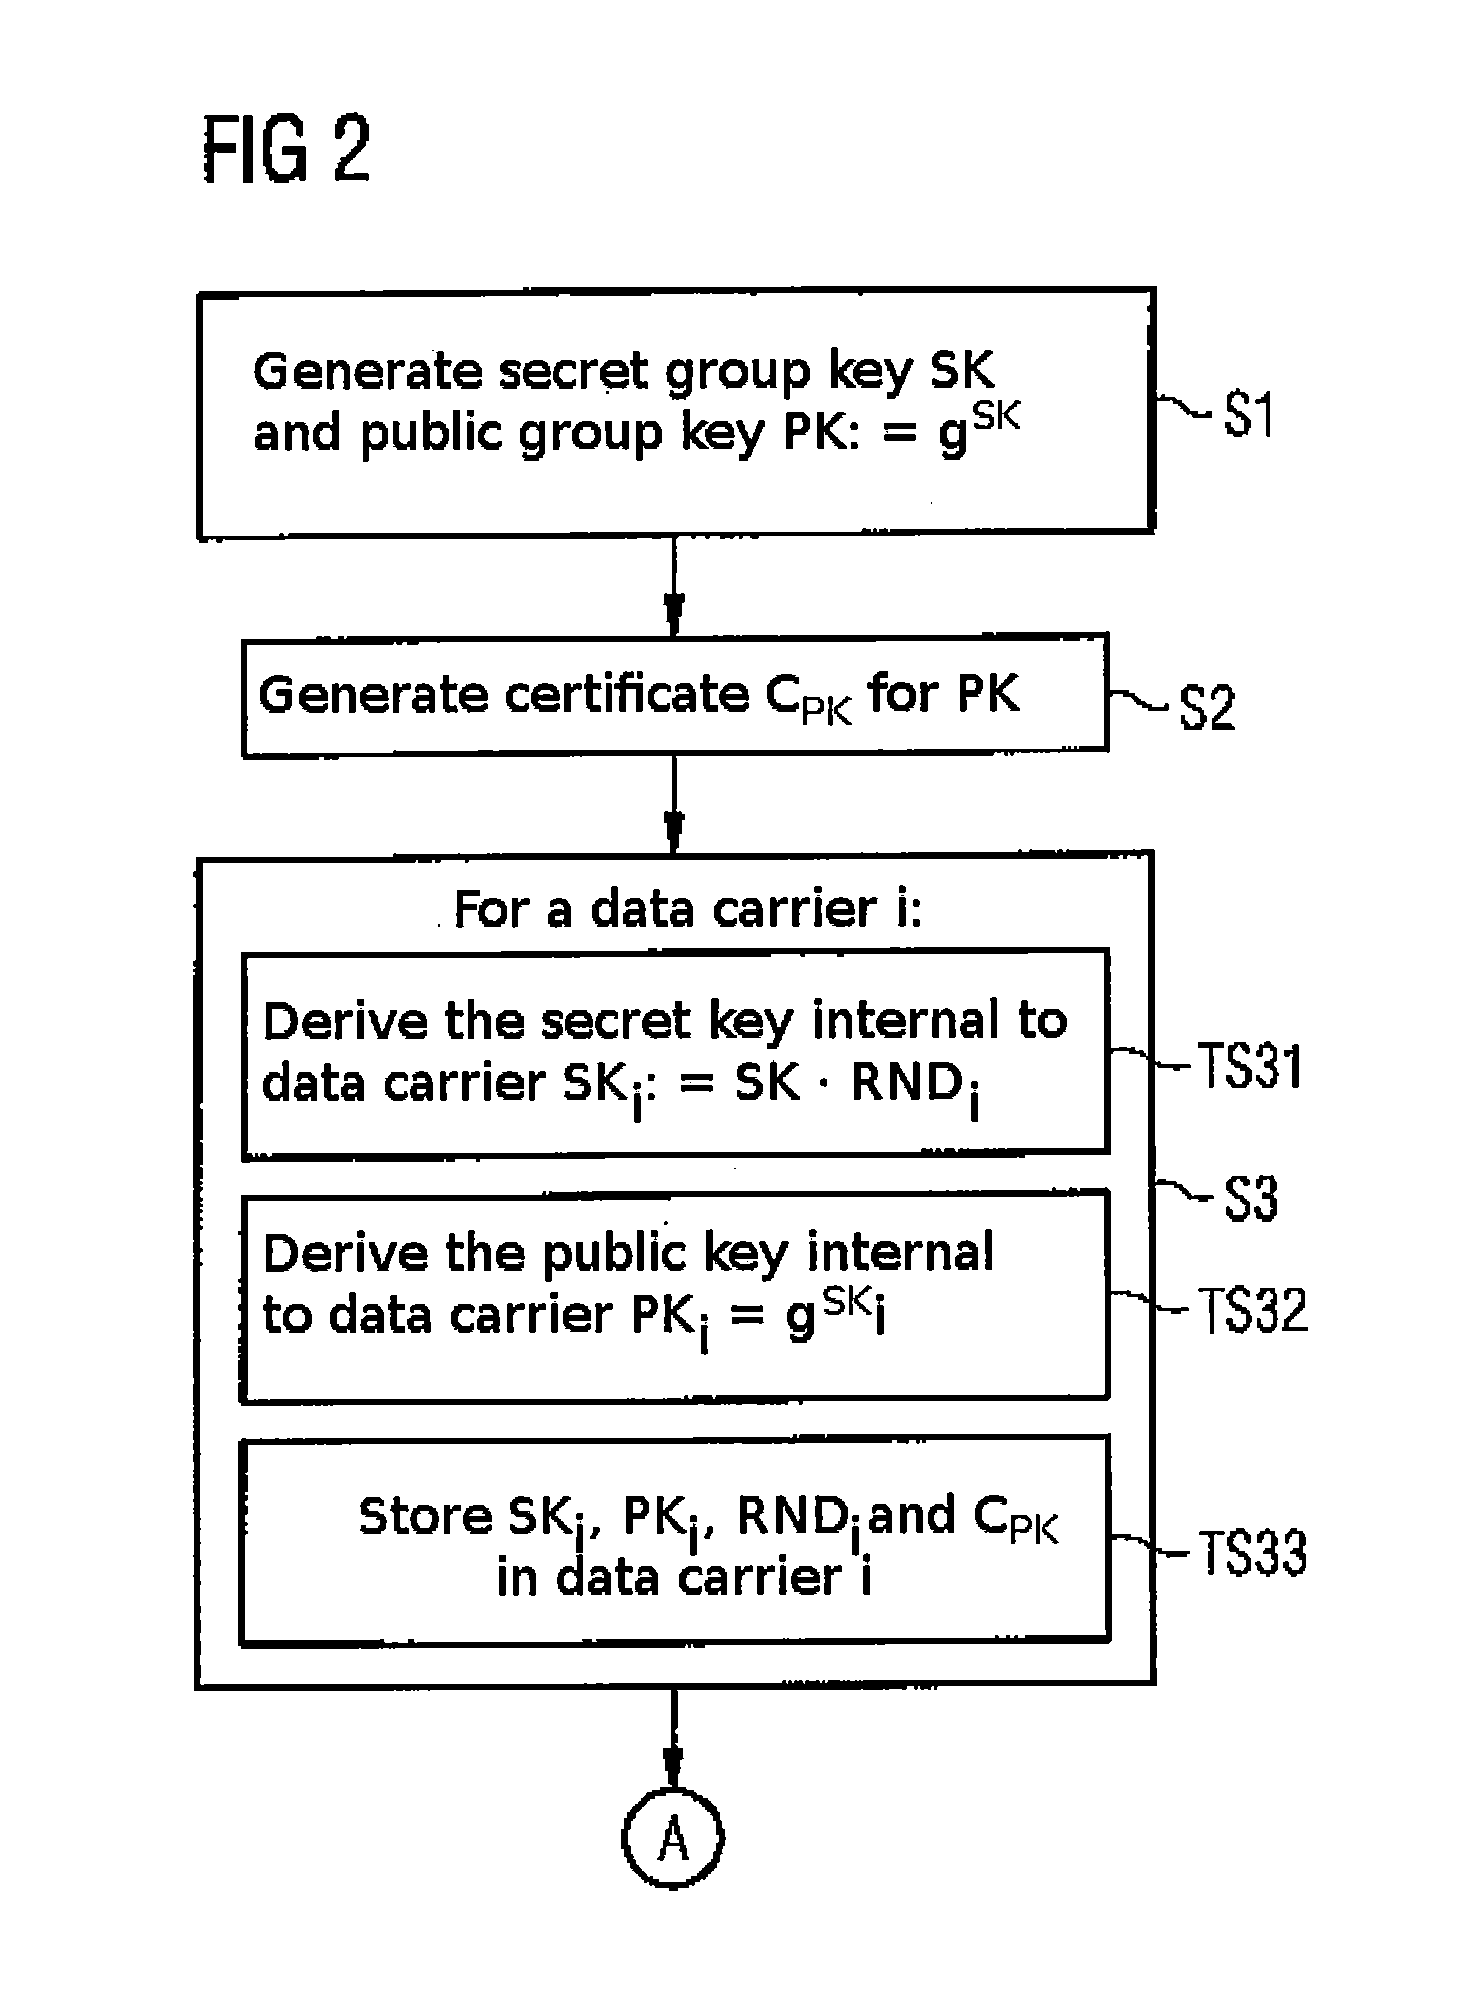 Method for authenticating a portable data carrier